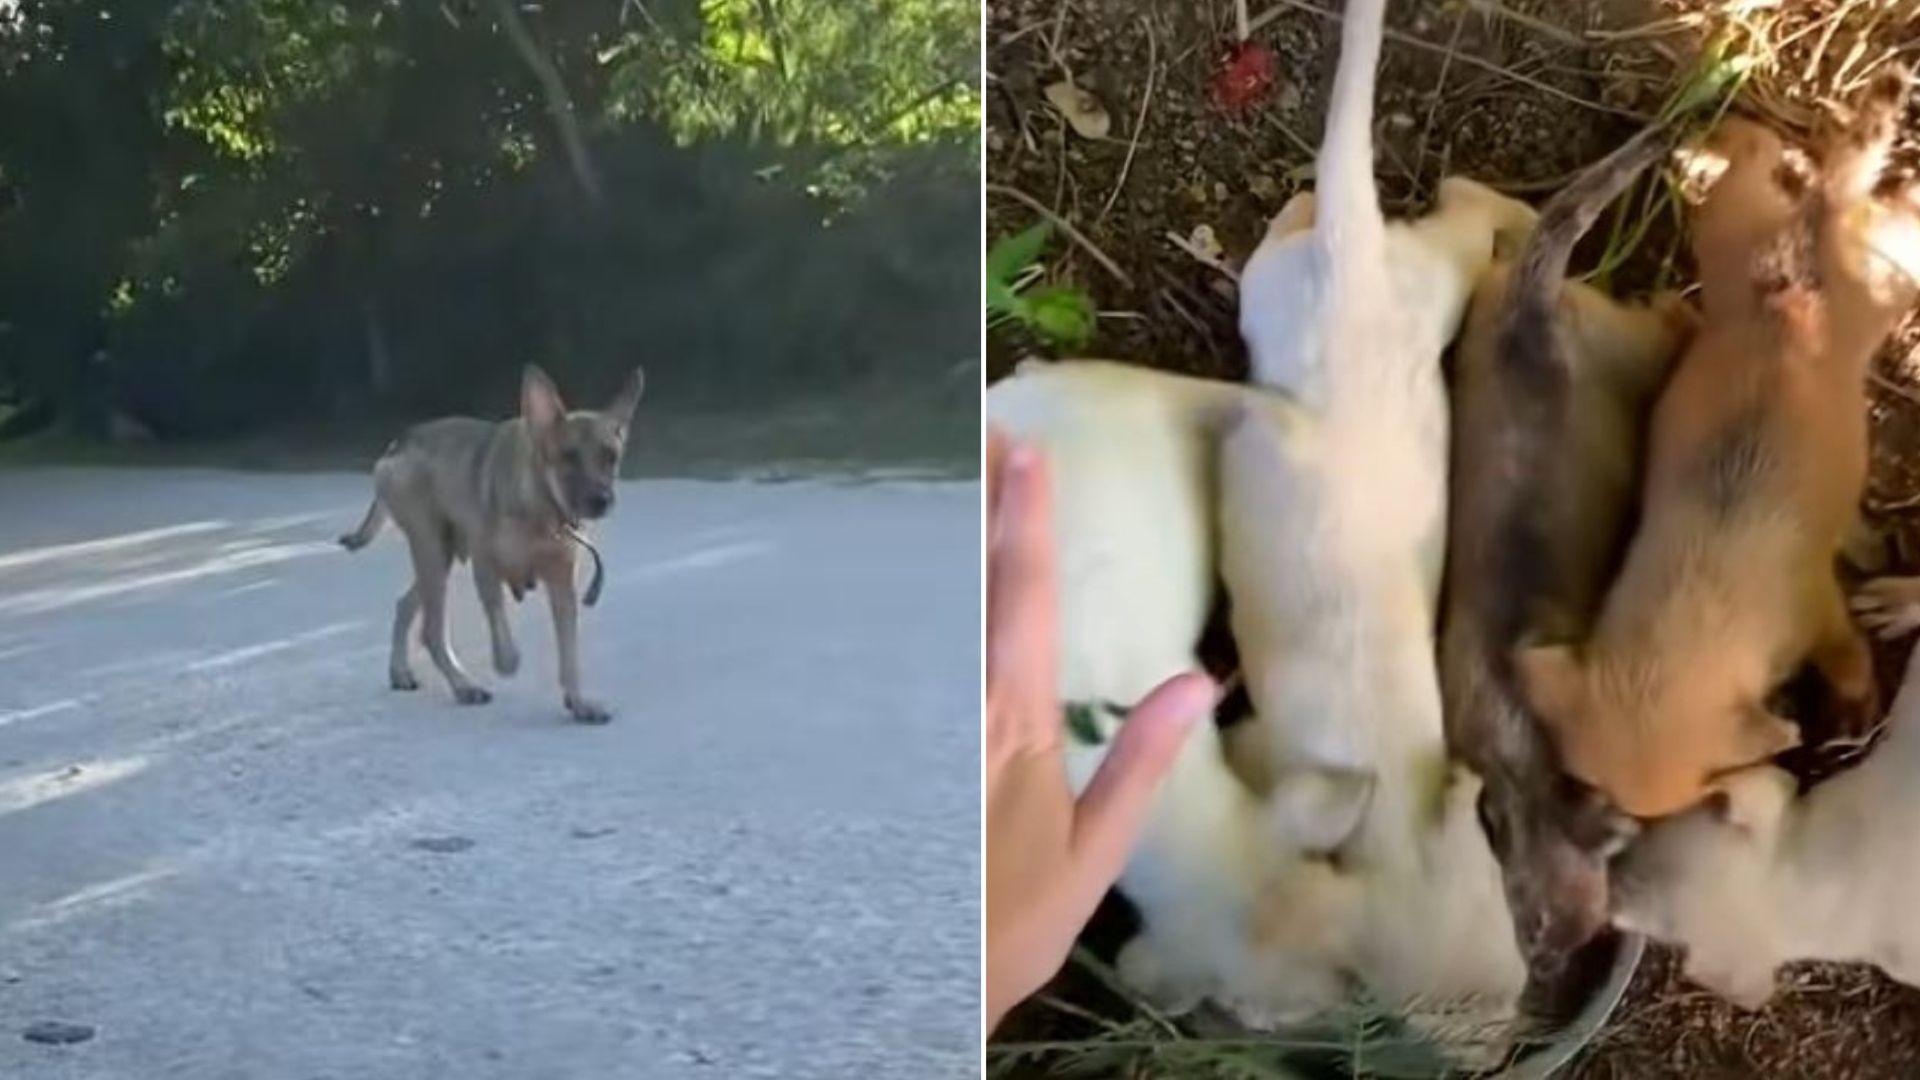 Brave Mama Dog Led Rescuers Into The Woods And Begged Them To Save Her Precious Pups